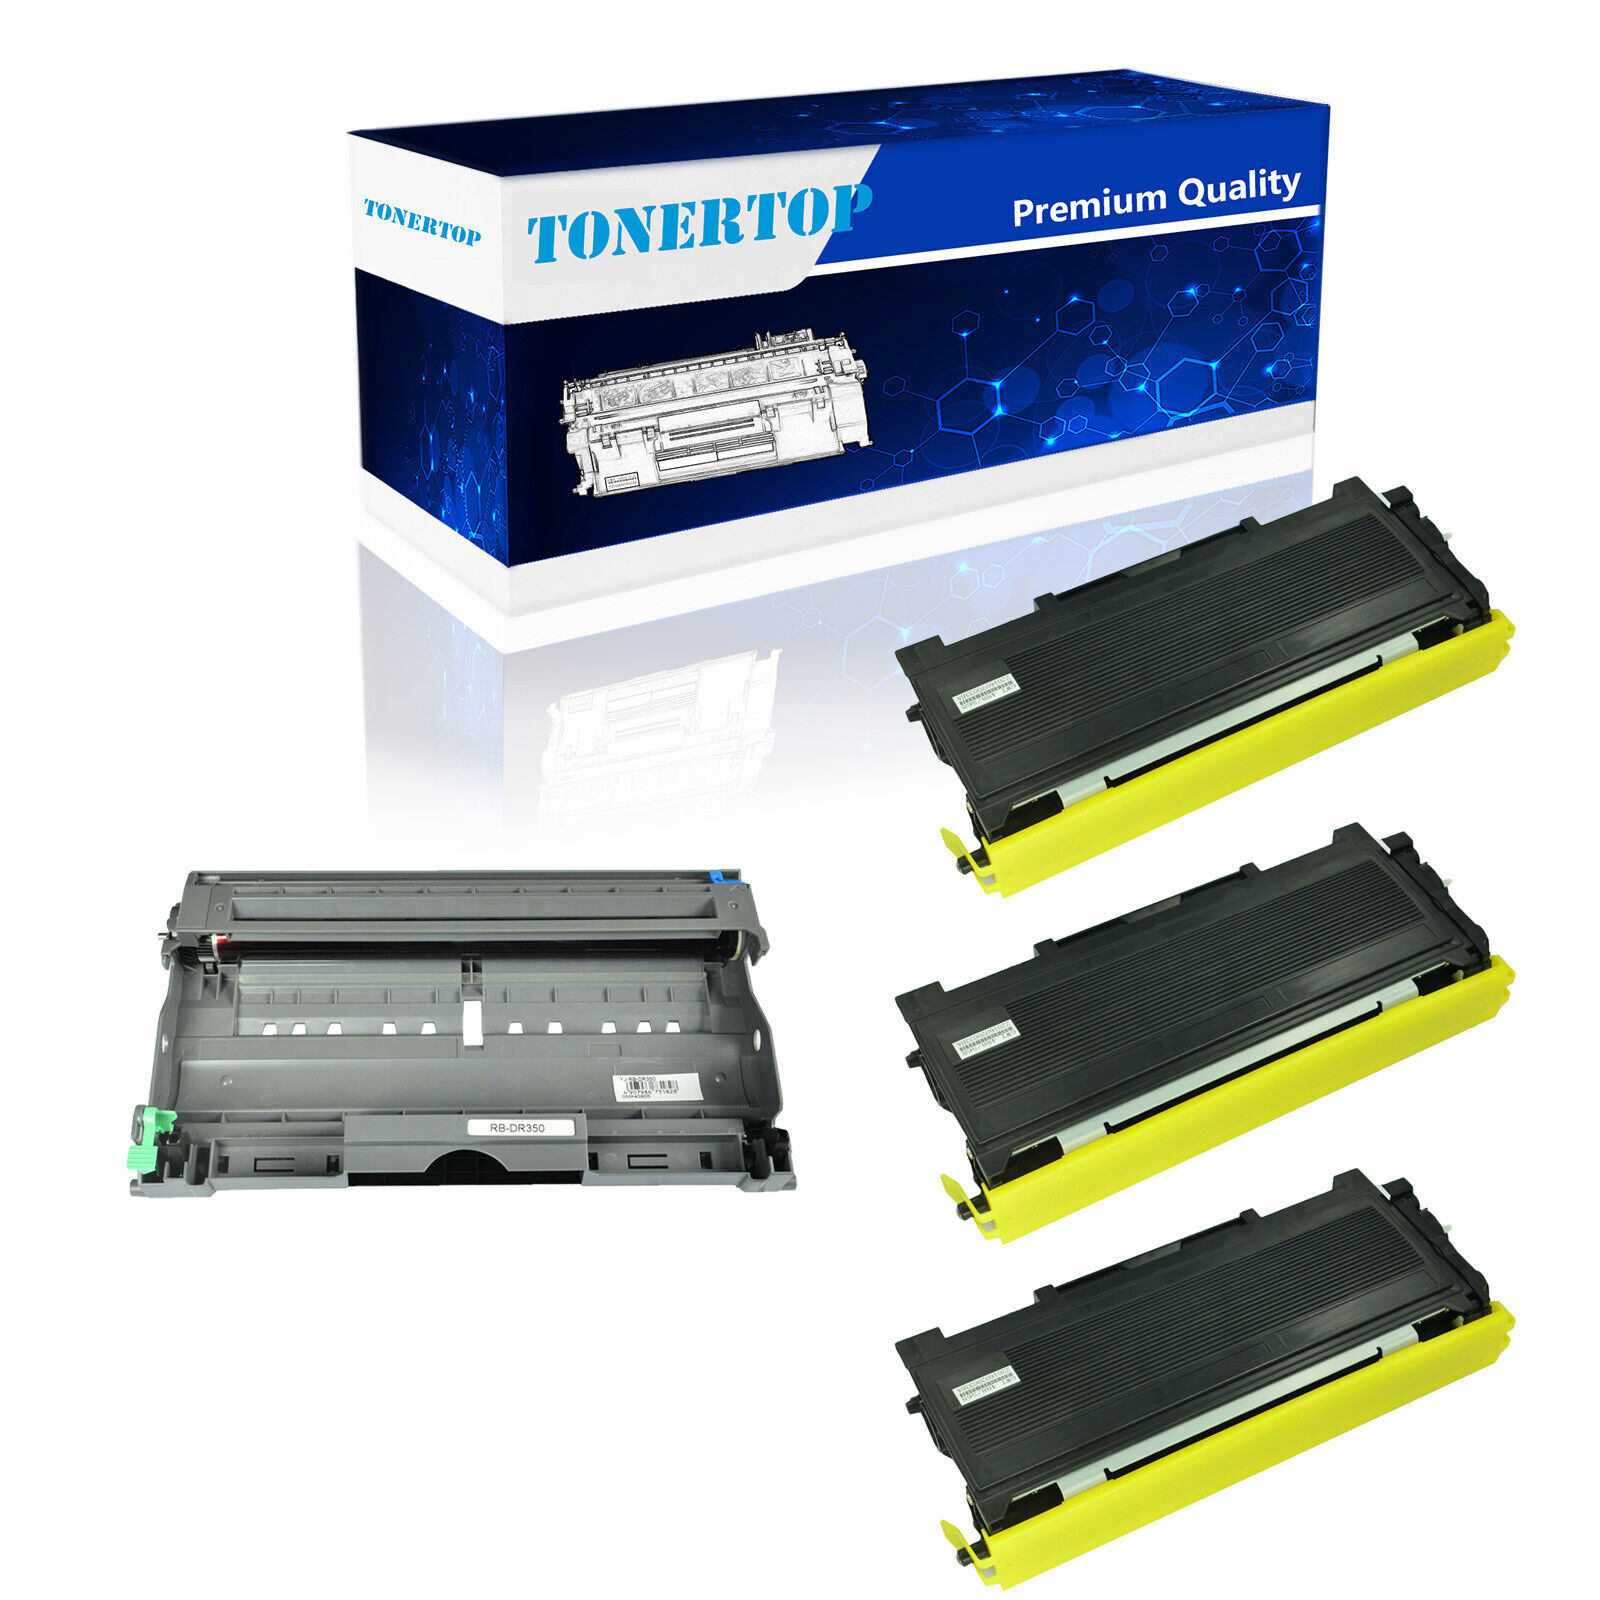 3PK TN350 Toner & 1PK DR350 Drum For Brother FAX-2850 FAX-2910 FAX-2920 MFC-7220